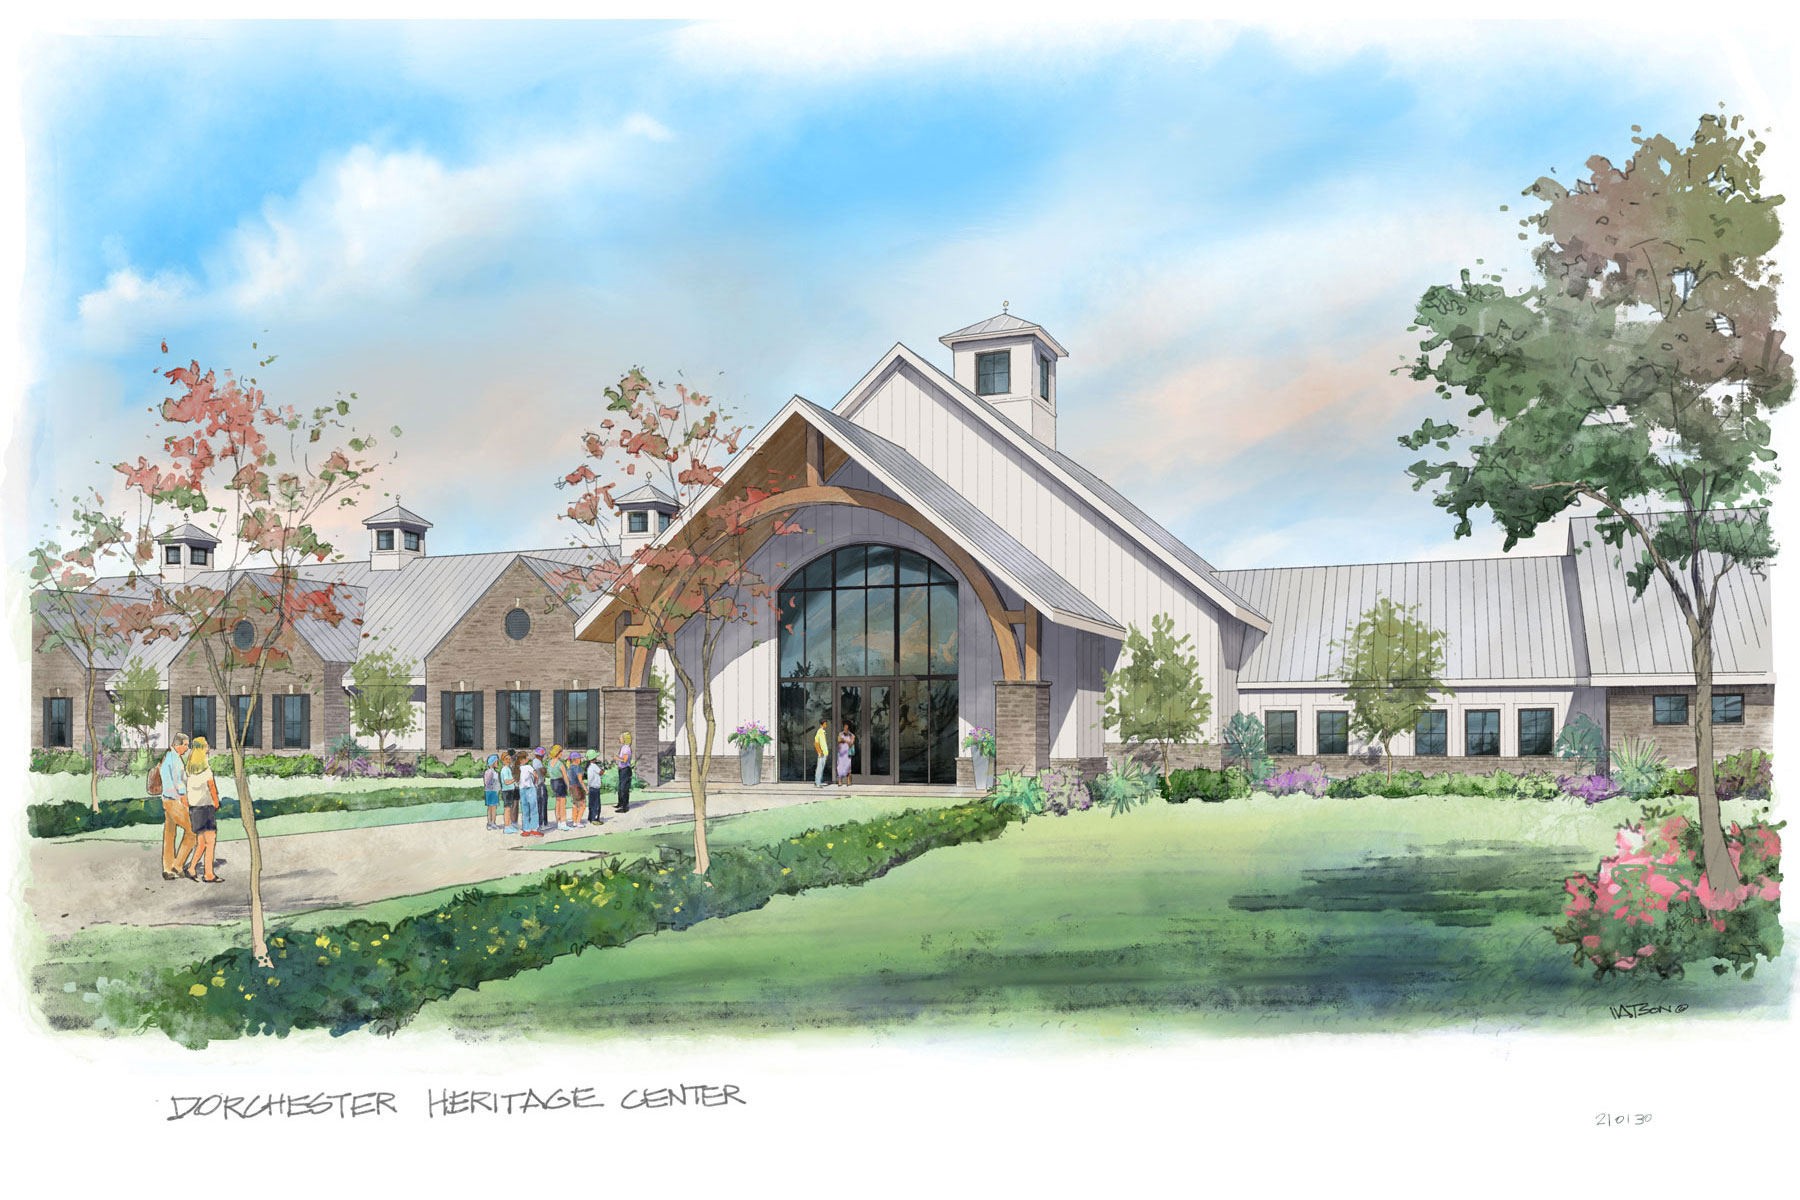 Front view rendering of Dorchester County Heritage Center Dale Watson rendering of Swallowtail Architecture design